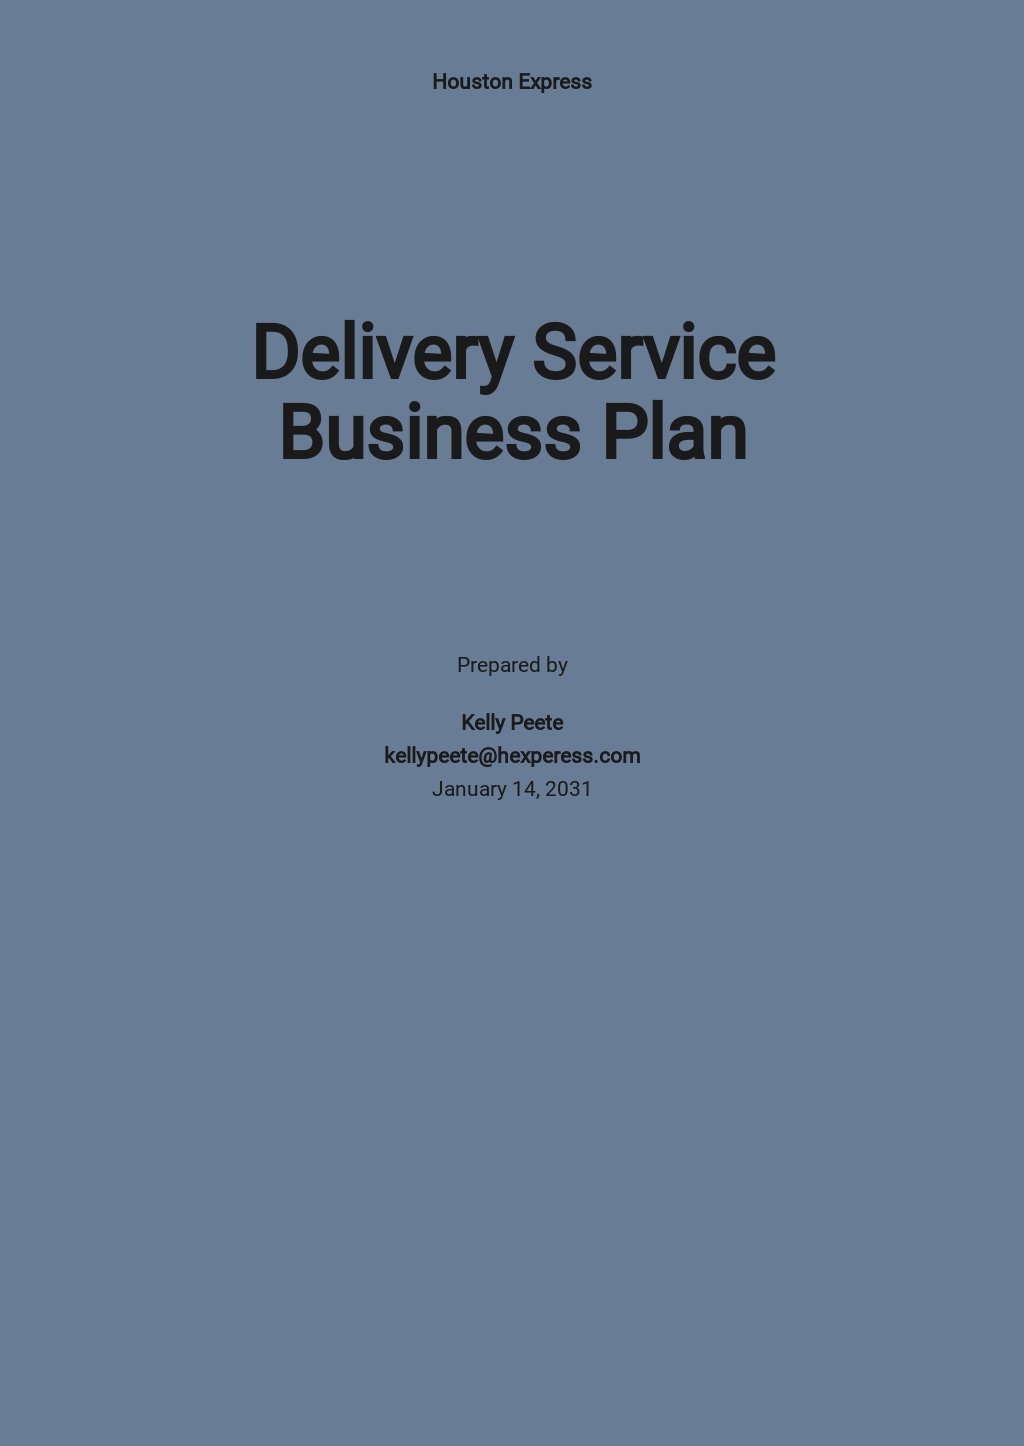 Delivery Service Business Plan Template.jpe